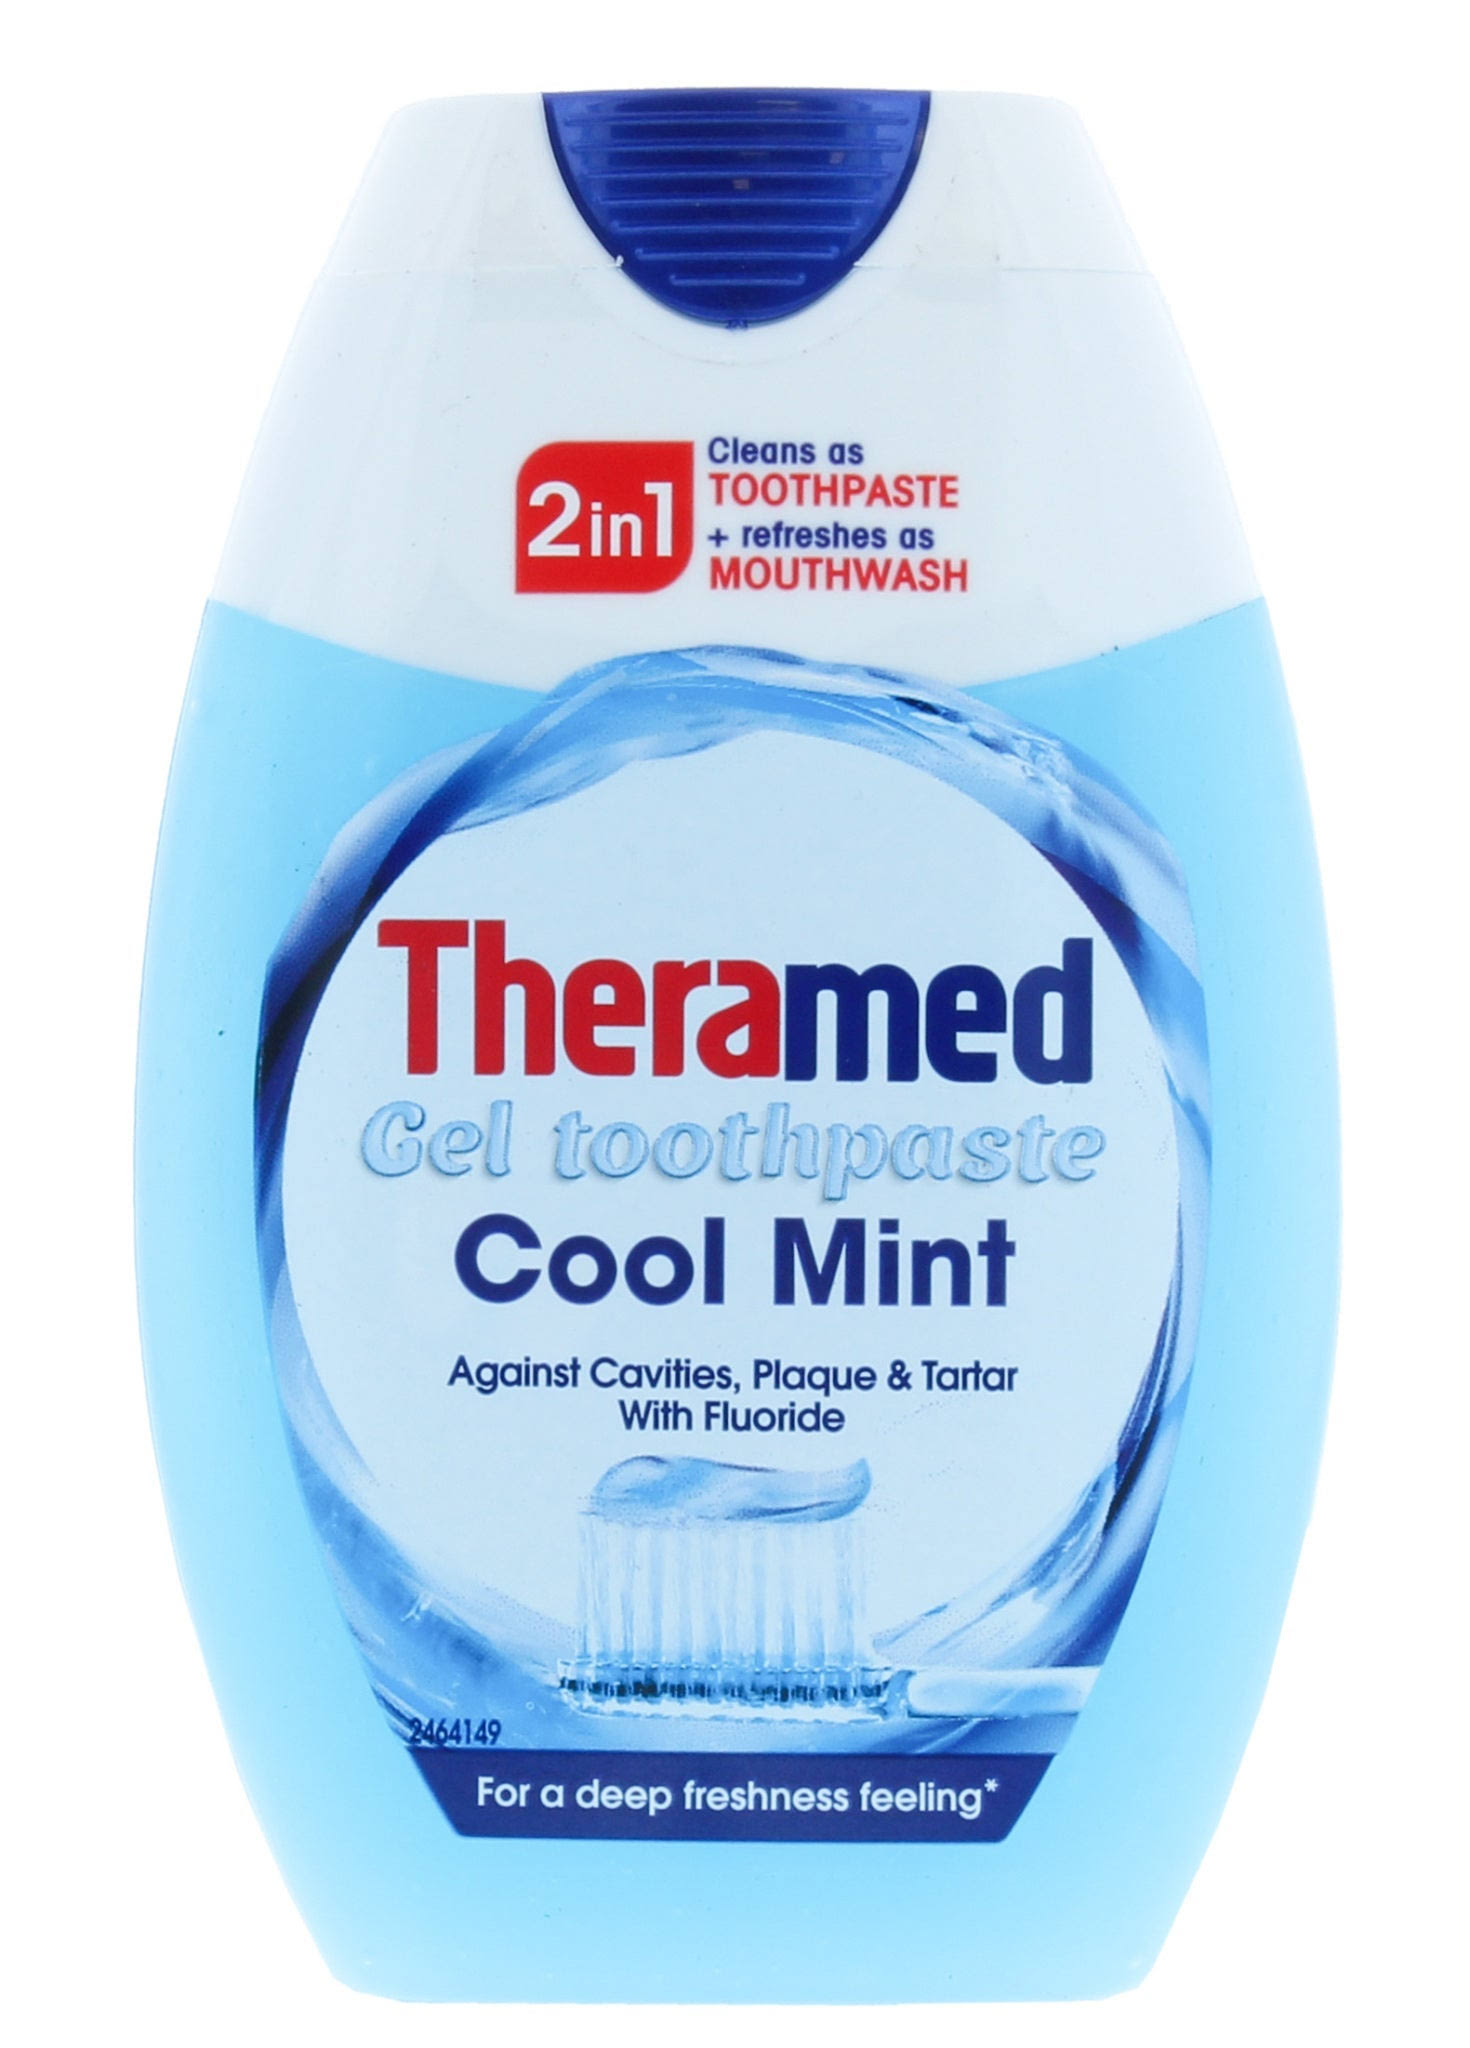 Thermamed 2in1 12hr Active Toothpaste + Mouthwash Cool Mint